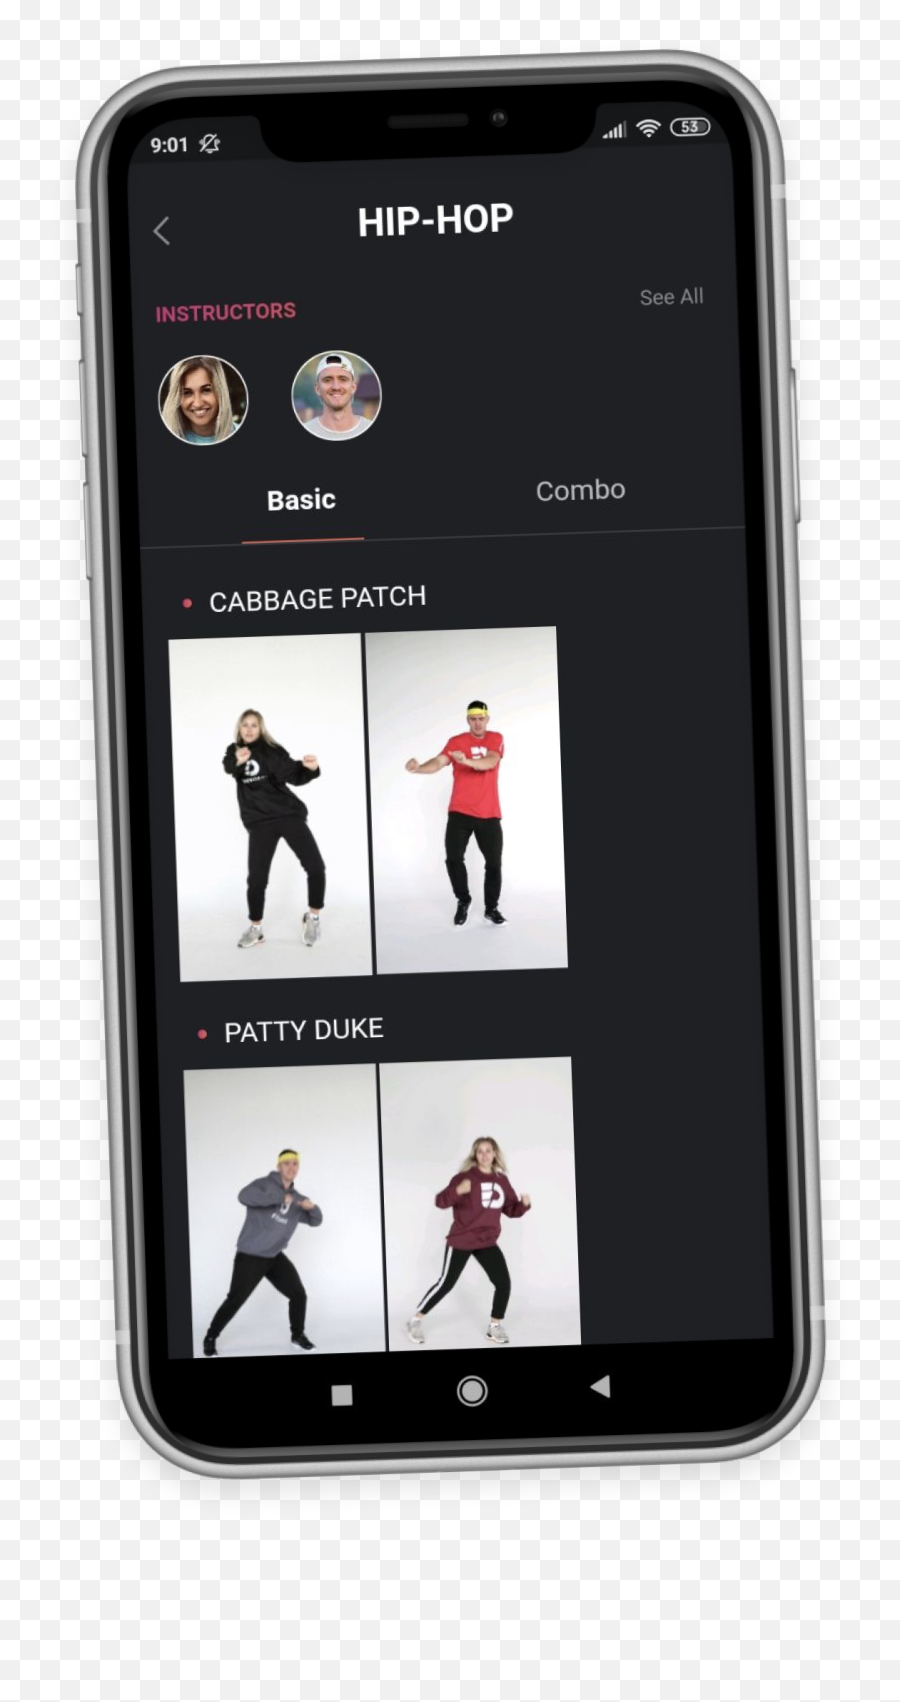 More About Everdance App - Camera Phone Emoji,Dancing Emoticon Doing Cabbage Patch